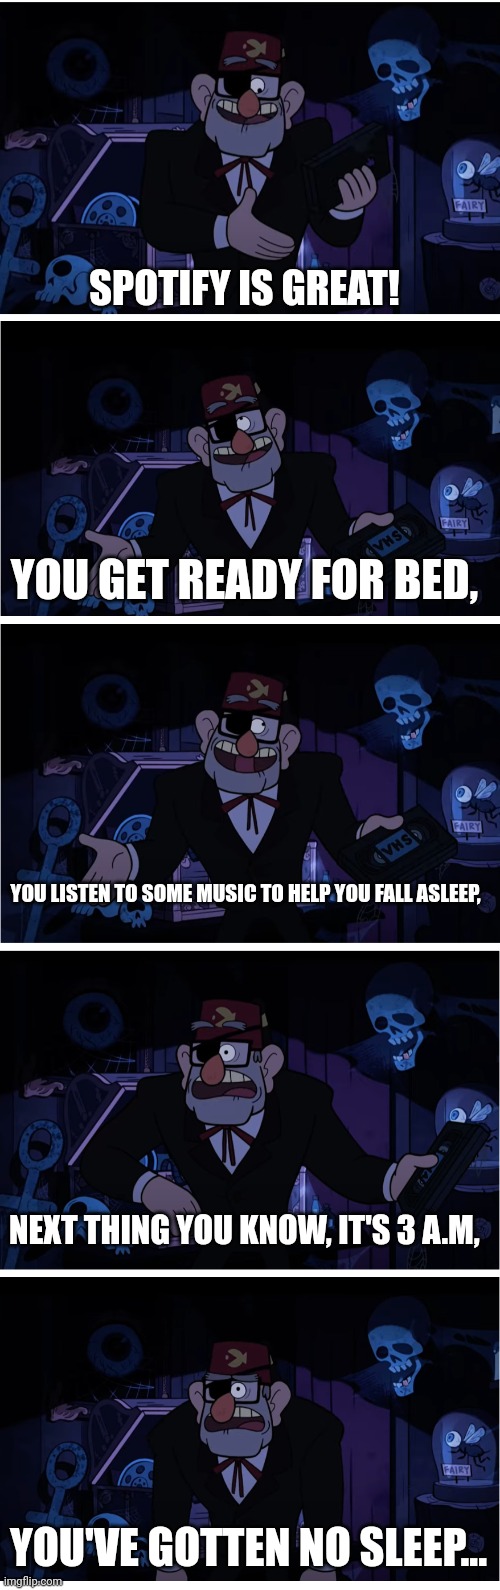 Ugh... | SPOTIFY IS GREAT! YOU GET READY FOR BED, YOU LISTEN TO SOME MUSIC TO HELP YOU FALL ASLEEP, NEXT THING YOU KNOW, IT'S 3 A.M, YOU'VE GOTTEN NO SLEEP... | image tagged in grunkle stan describes,spotify,music,music meme,sleep,sleeping | made w/ Imgflip meme maker